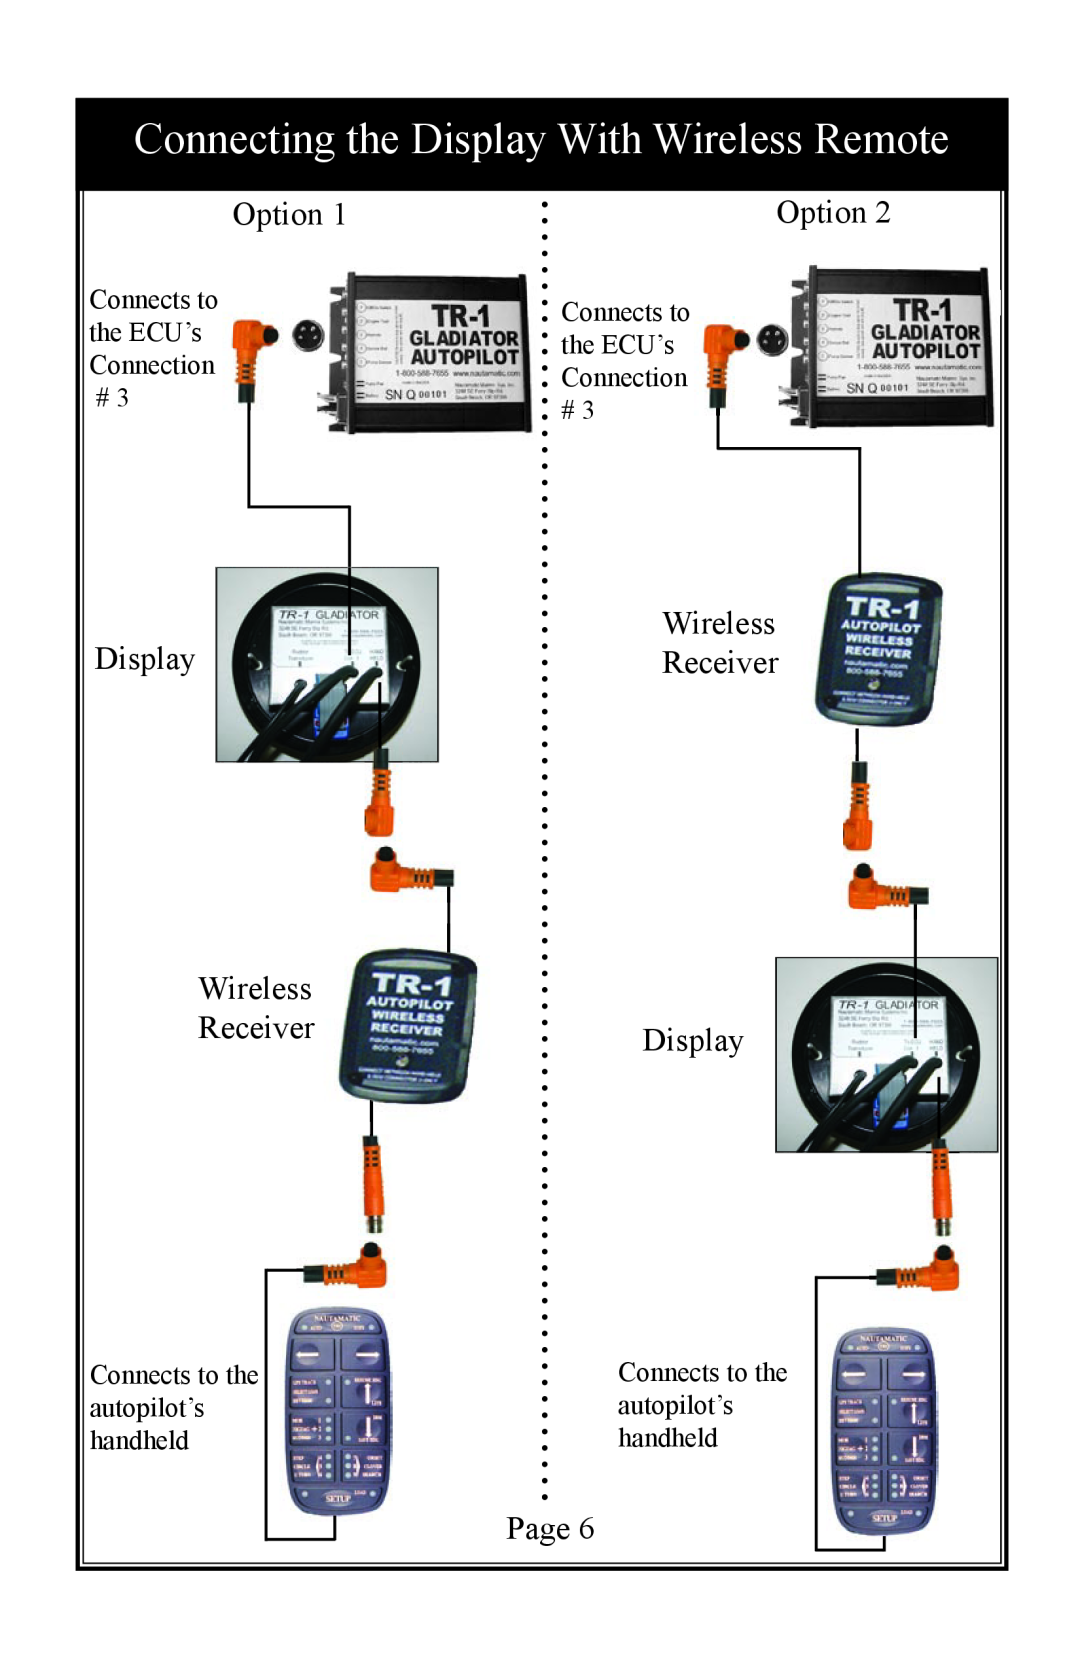 Garmin TR-1 owner manual Connecting the Display With Wireless Remote, Connects to the 